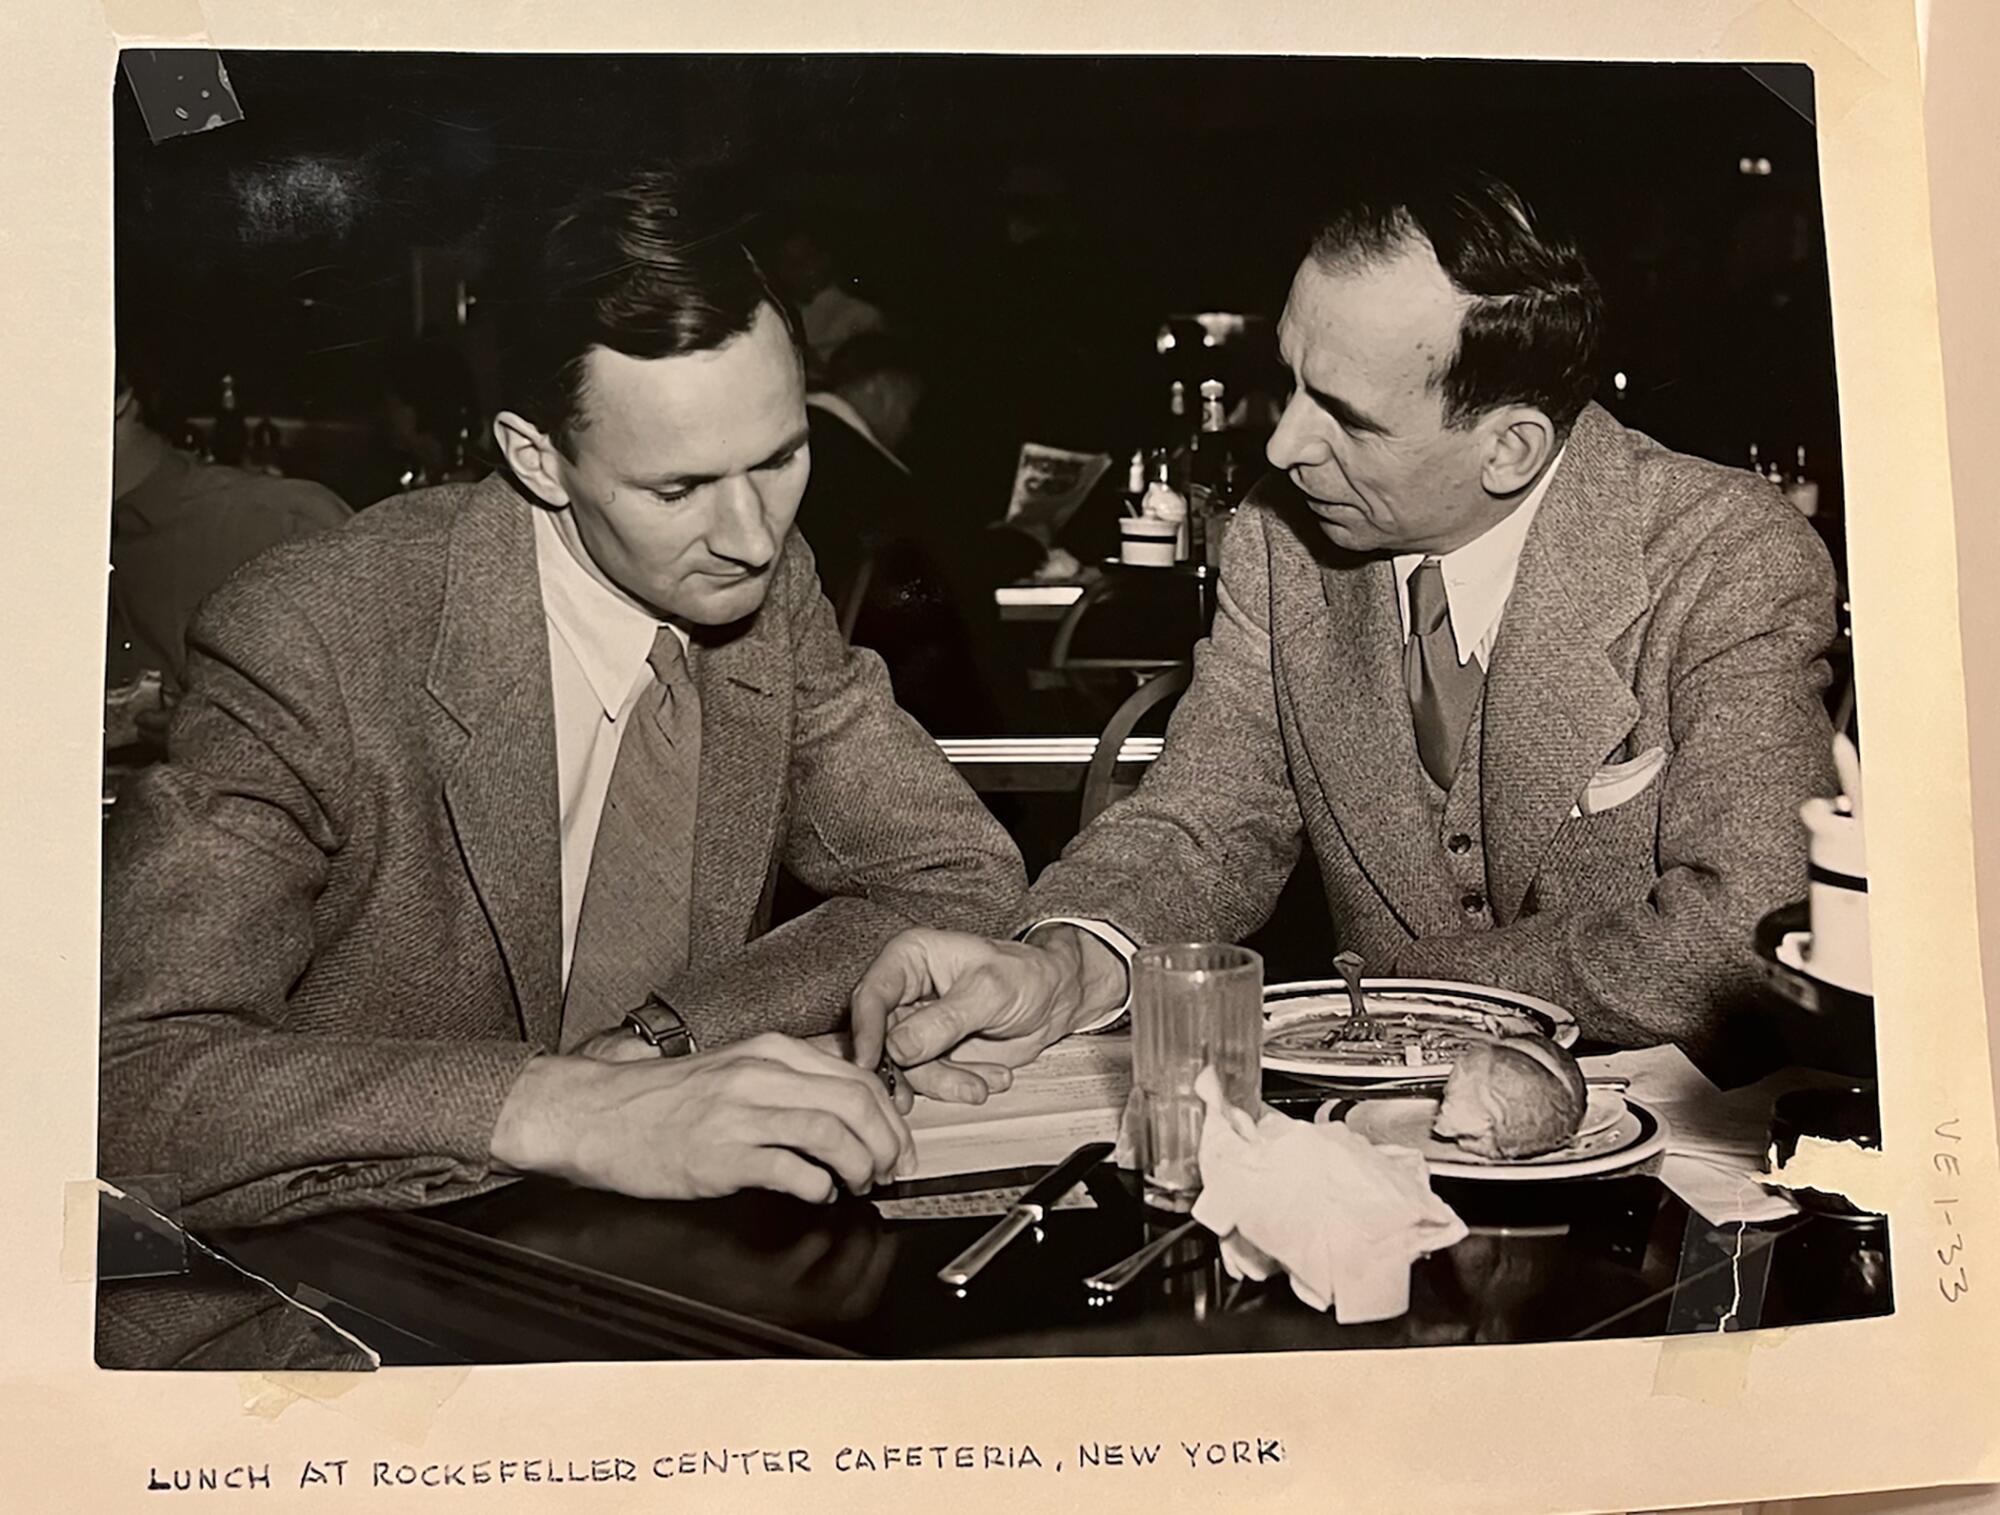  Two men in suits sit at a table talking.